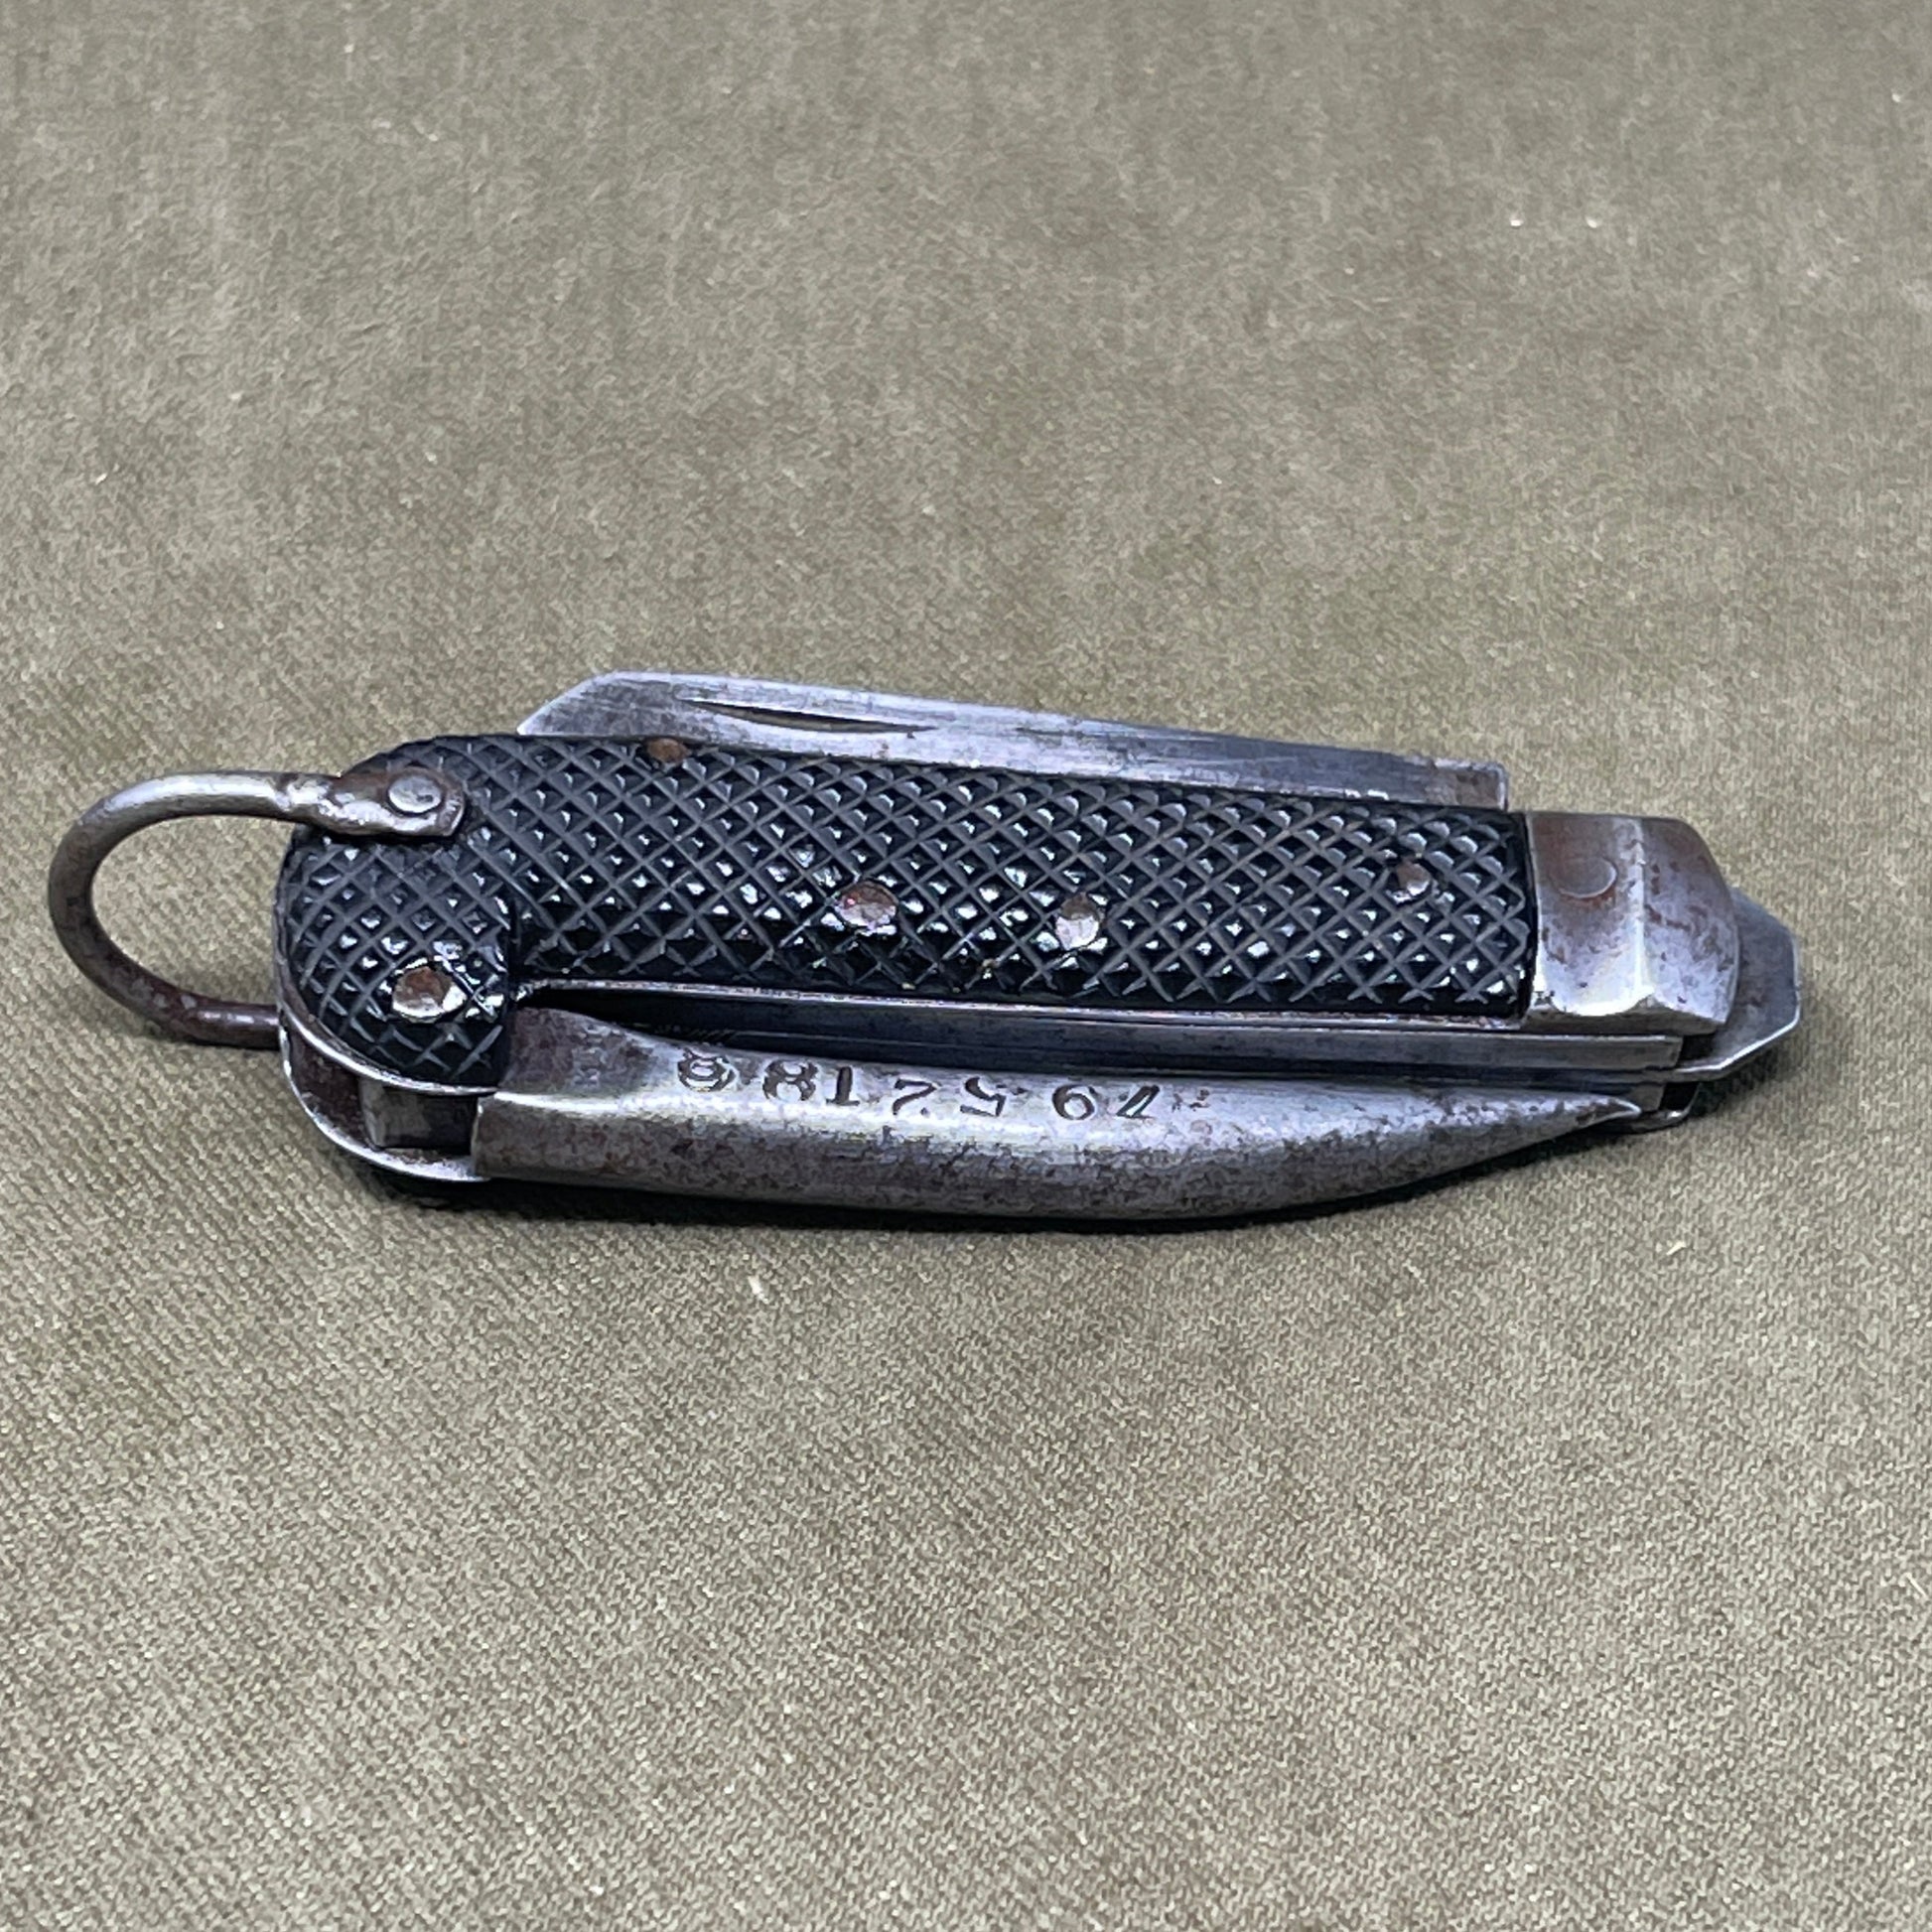 A nice example of a British 1943 Dated Pocket Jack Knife made by Humphreys Radiant of Sheffield  The blades are in good condition, the chequered Bakelite grip is intact and all the blades lock and close as they should. The steel can opener is in good condition